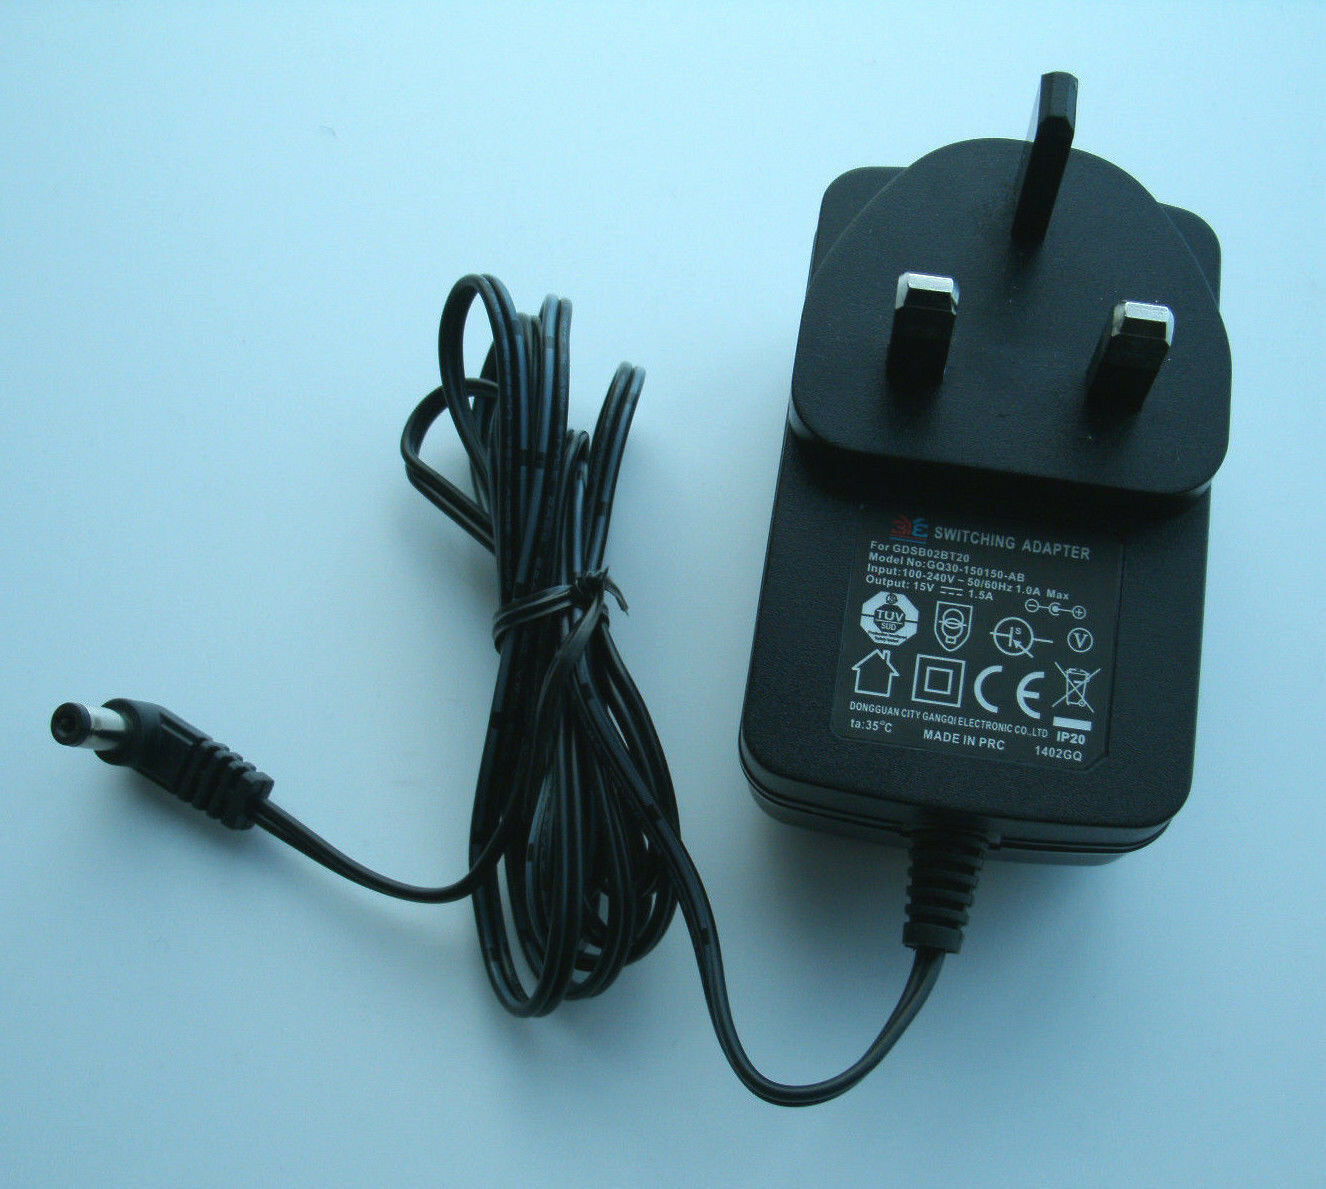 BRAND NEW 3Y3 GQ30-150150-AB GDSB02BT20 SWITCHING ADAPTER 15V 1.5A UK PLUG Brand: 3Y3 Type: AC/DC Adapter MPN: G